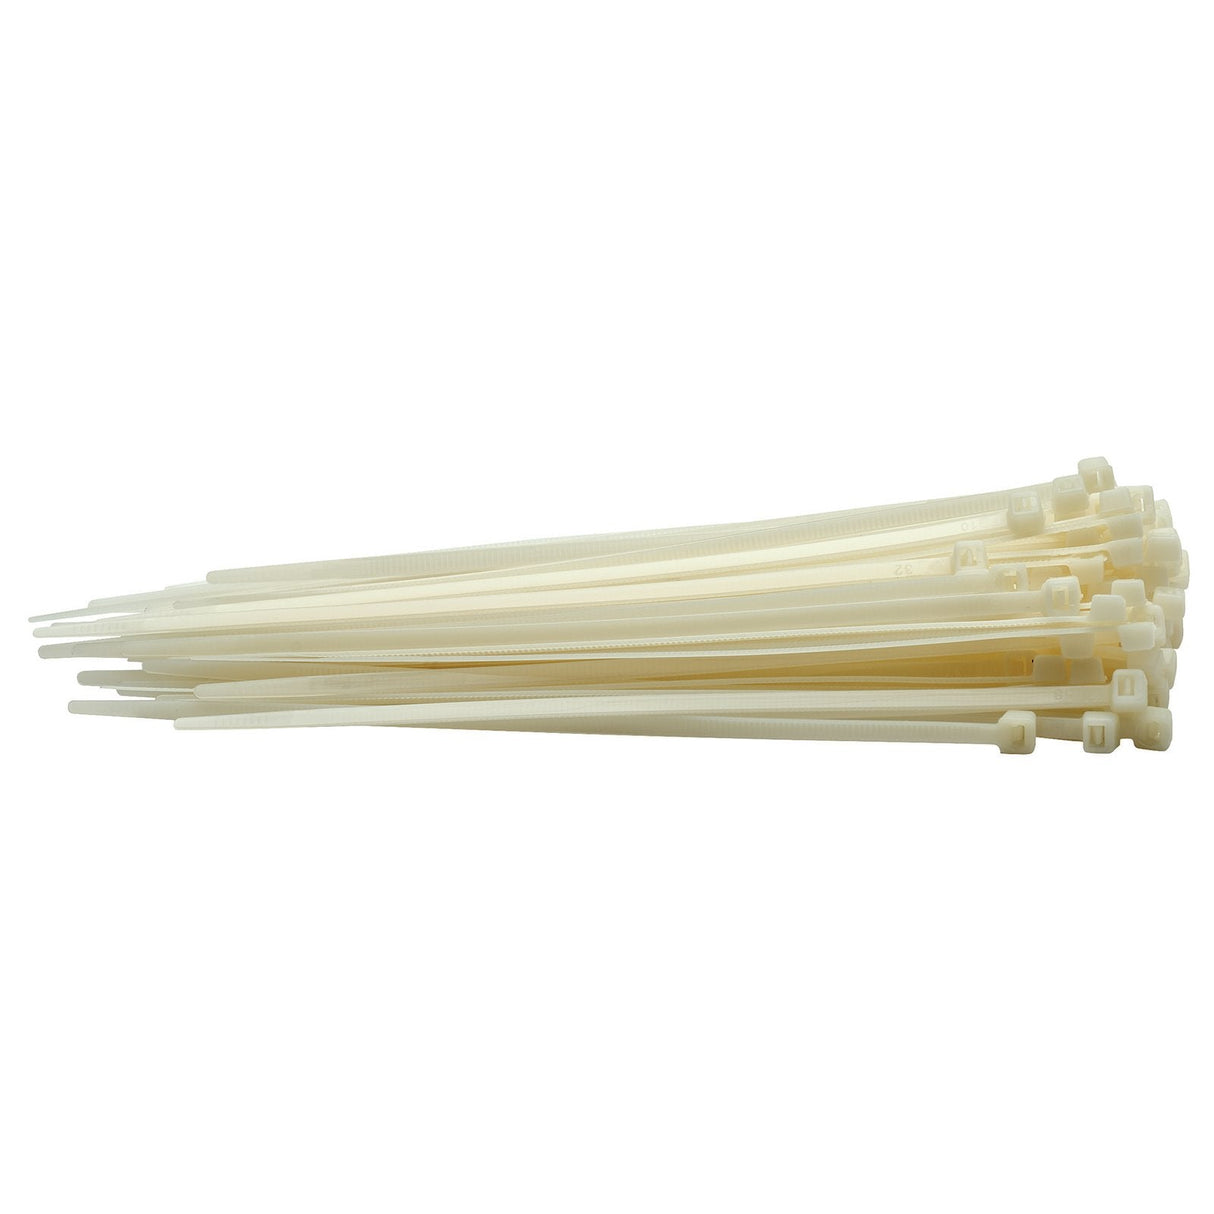 Draper Cable Ties, 4.8 X 200mm, White (Pack Of 100) - CT3W - Farming Parts